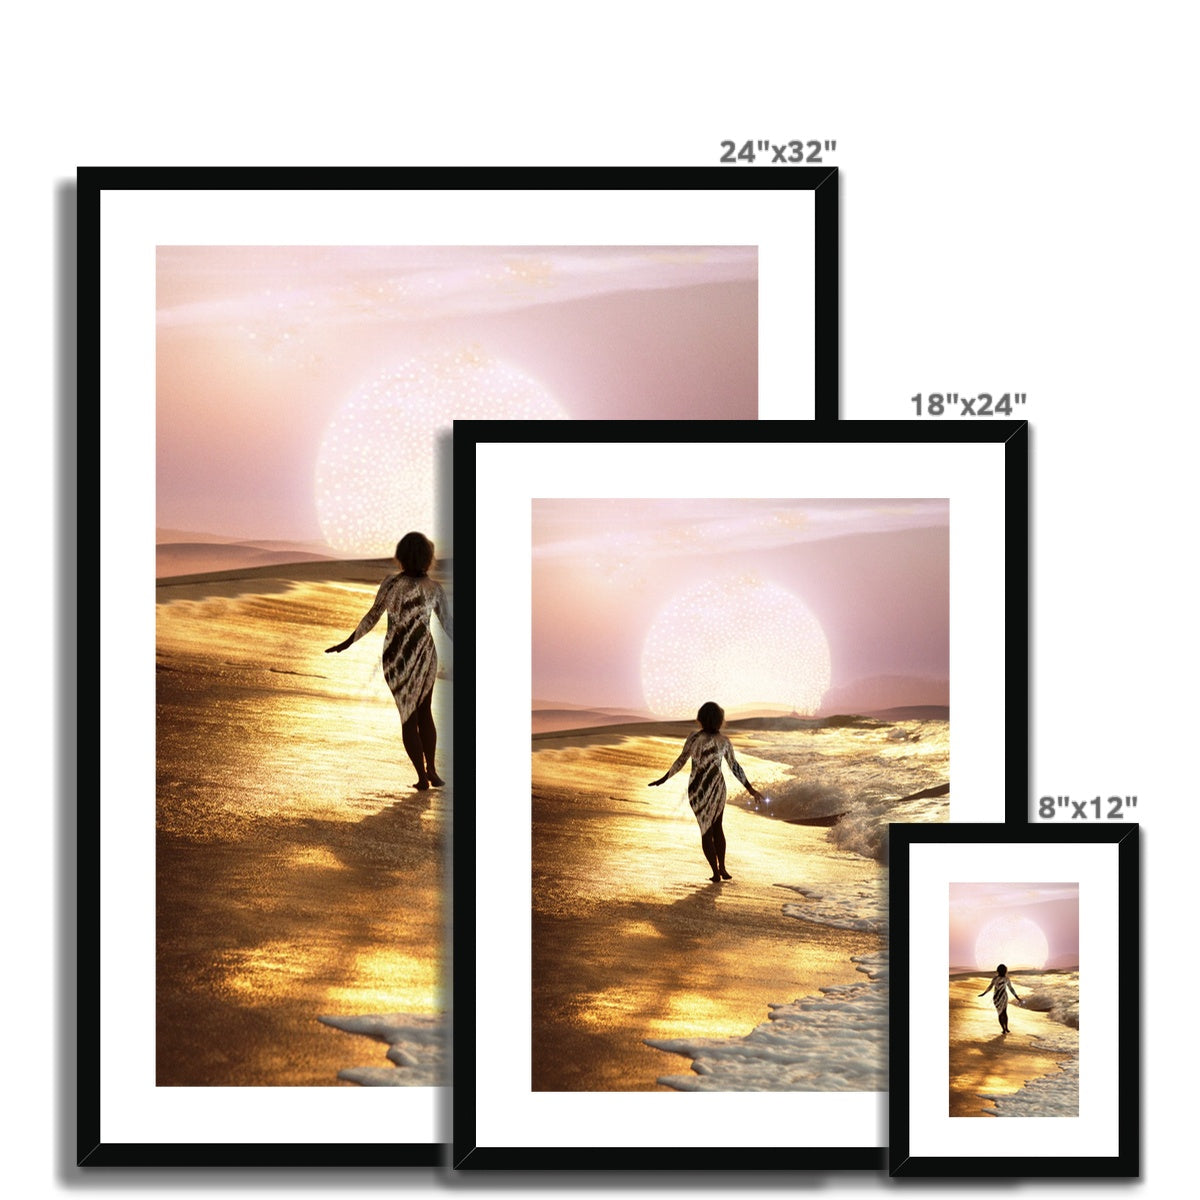 Total Bliss Framed & Mounted Print - Starseed Designs Inc.